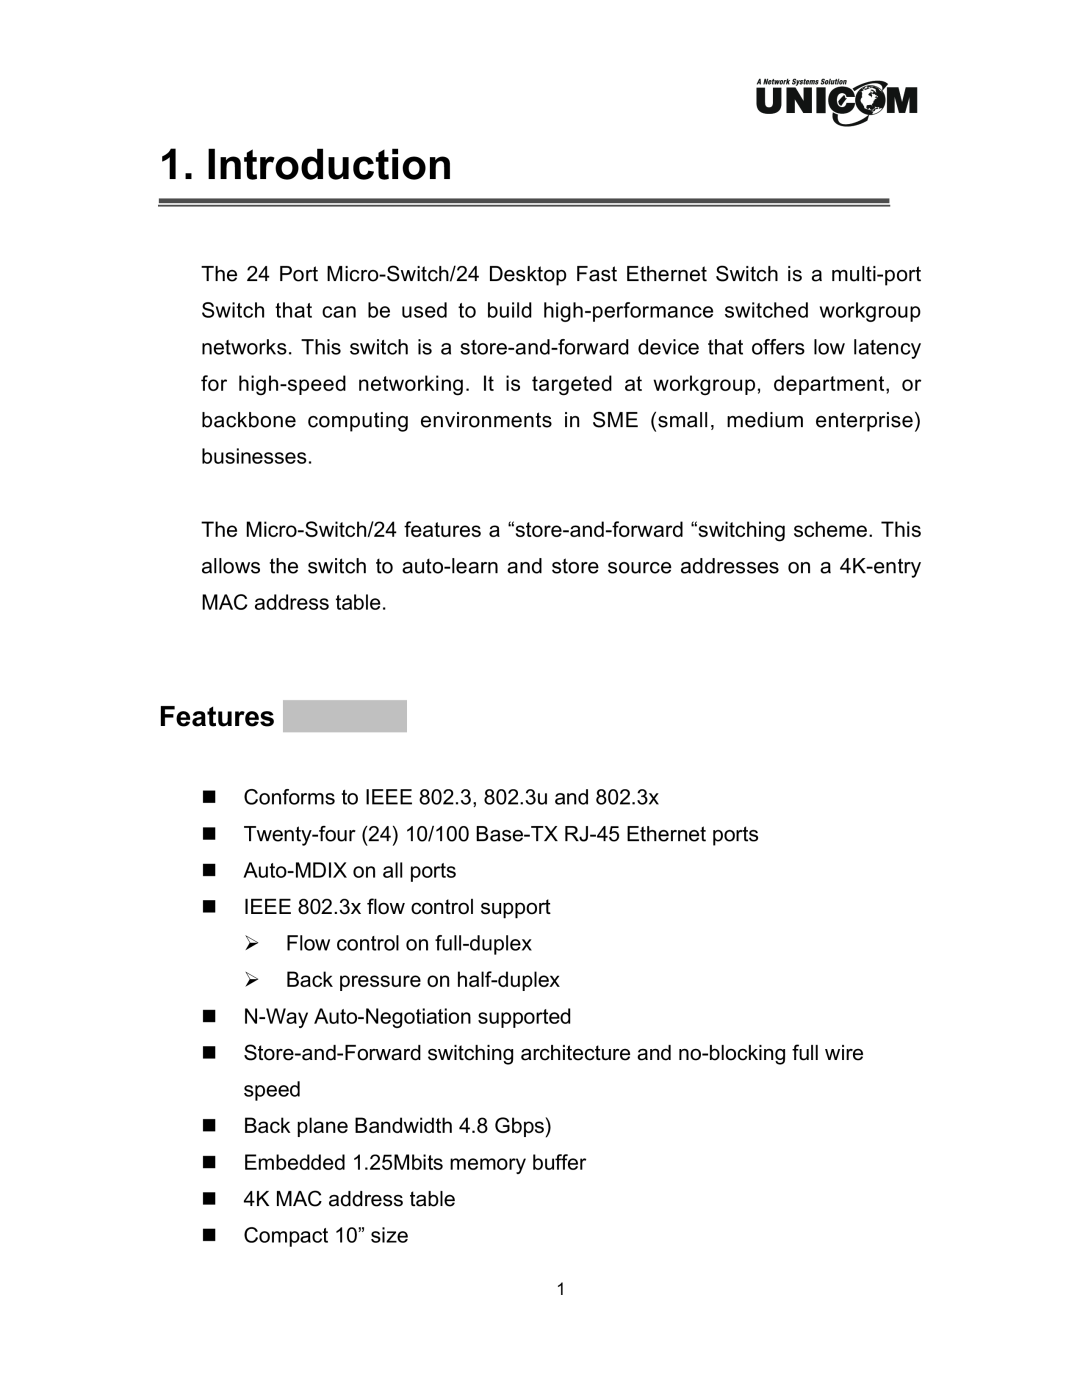 UNICOM Electric FEP-32024T specifications Introduction, Features 